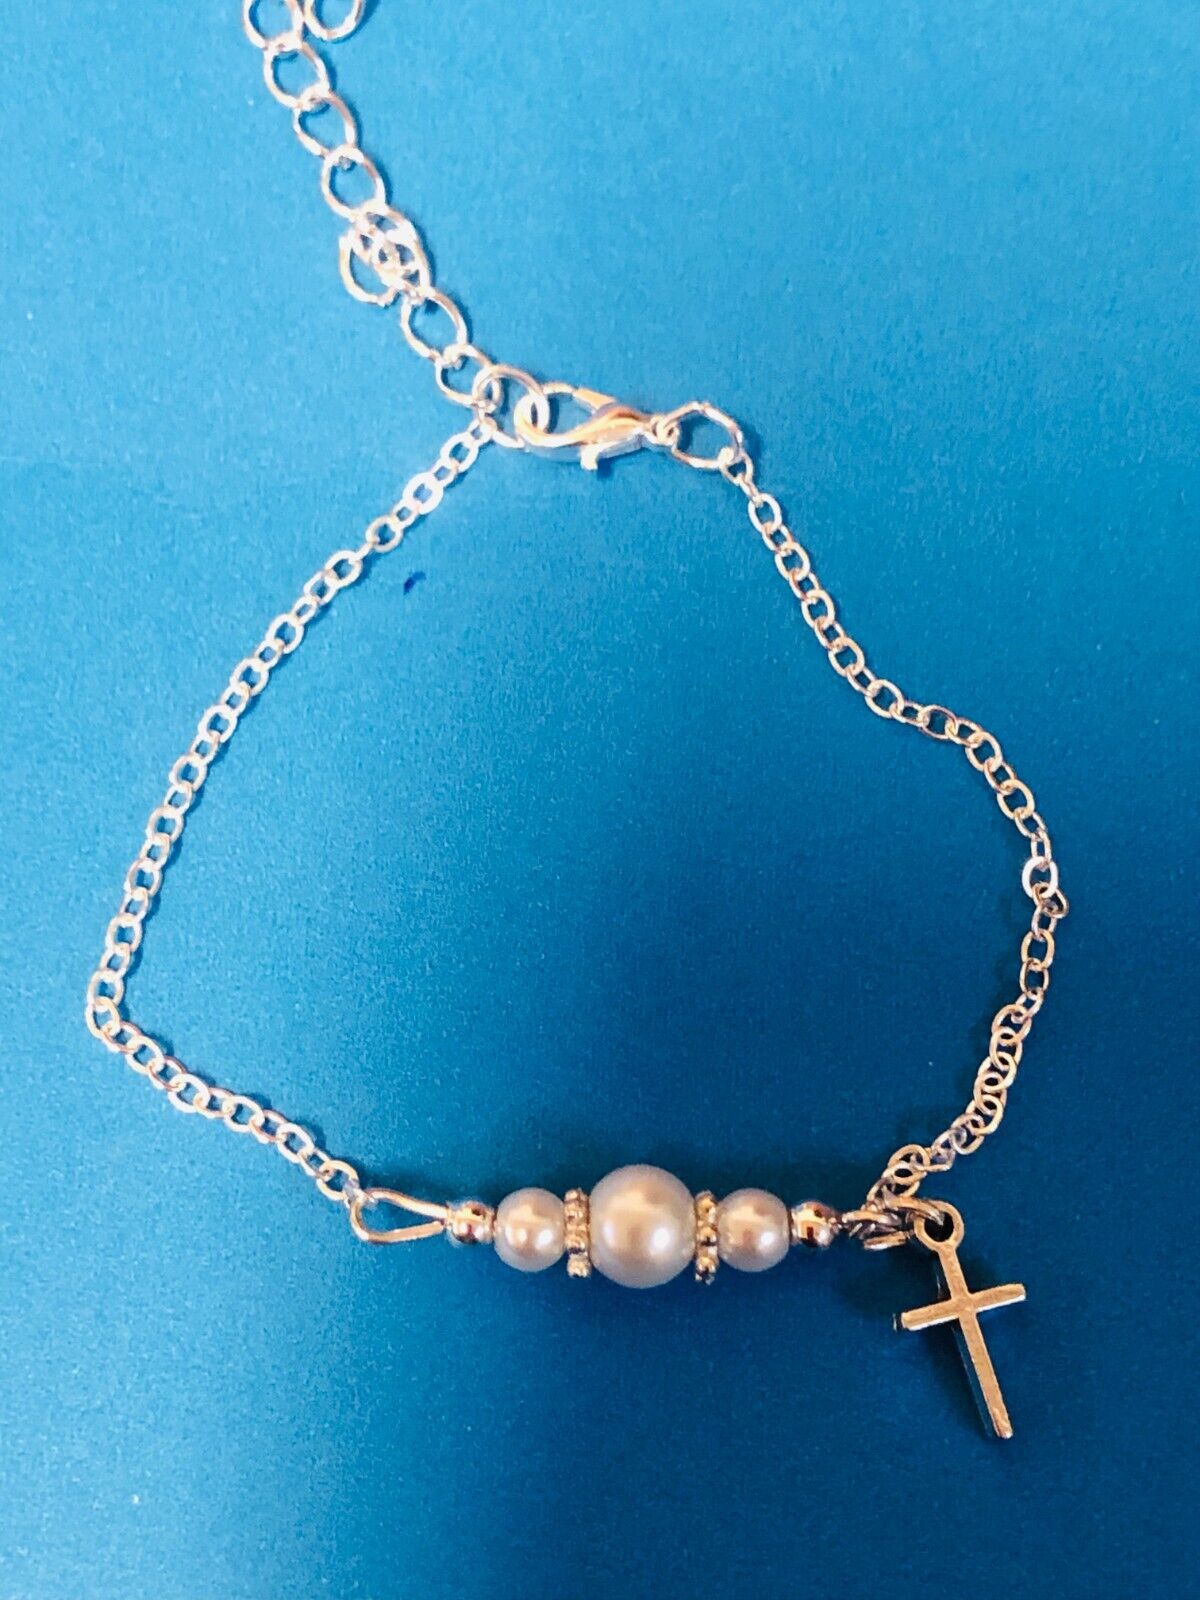 Children's Glass Pearl Bracelet with Cross Charm  7" Adjustable, New - Bob and Penny Lord